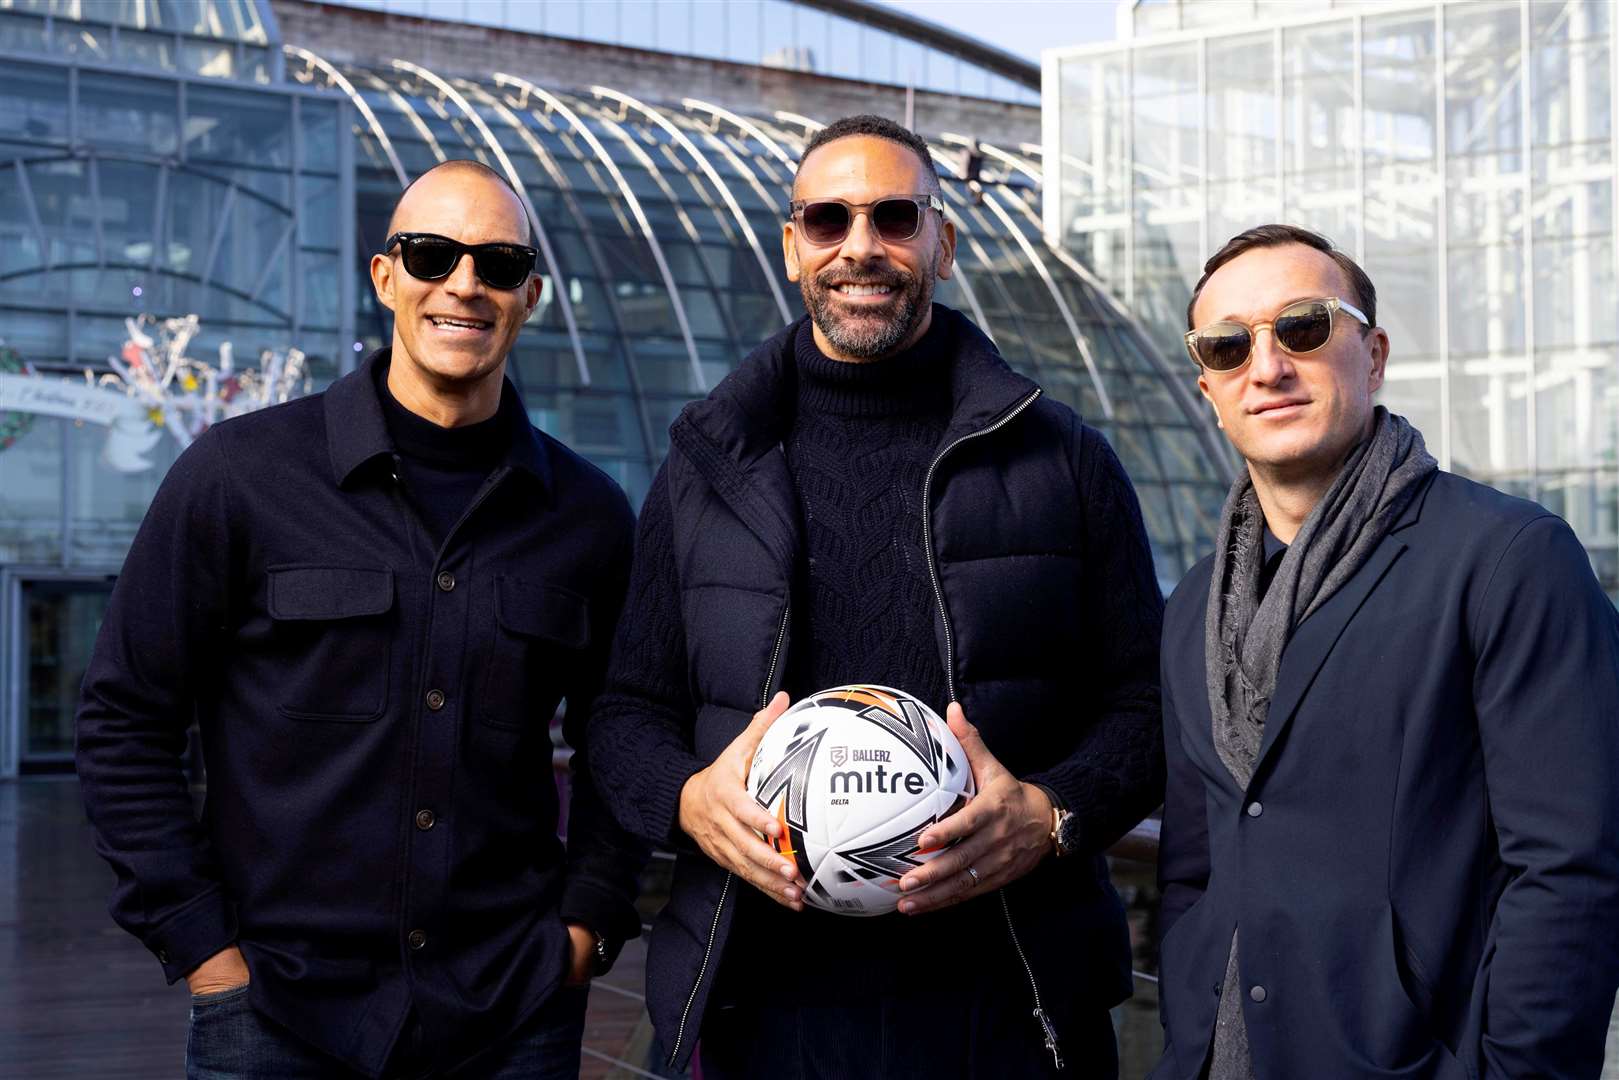 From left: Bobby Zamora, Rio Ferdinand, and Mark Noble at the shopping centre. Picture: David Parry/PA Wire